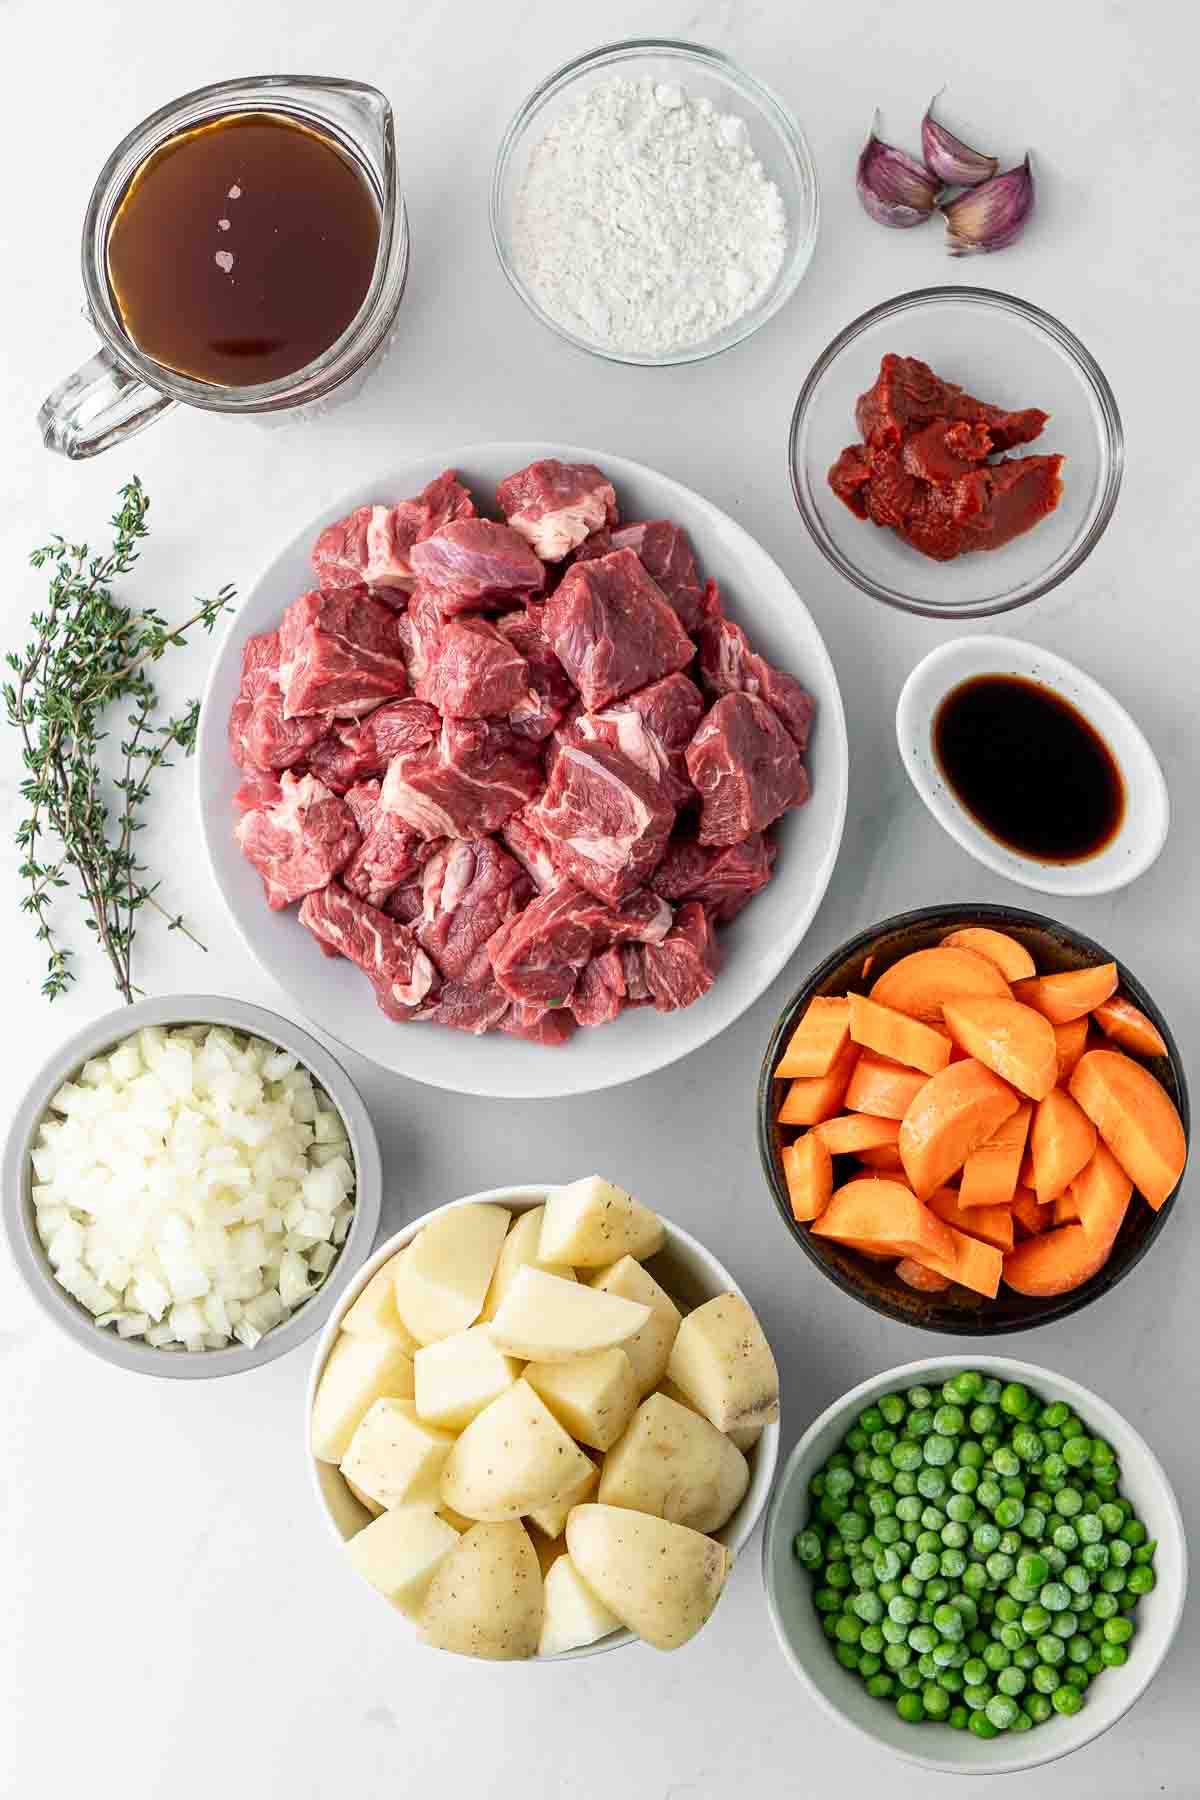 All ingredients needed for beef stew laid out.